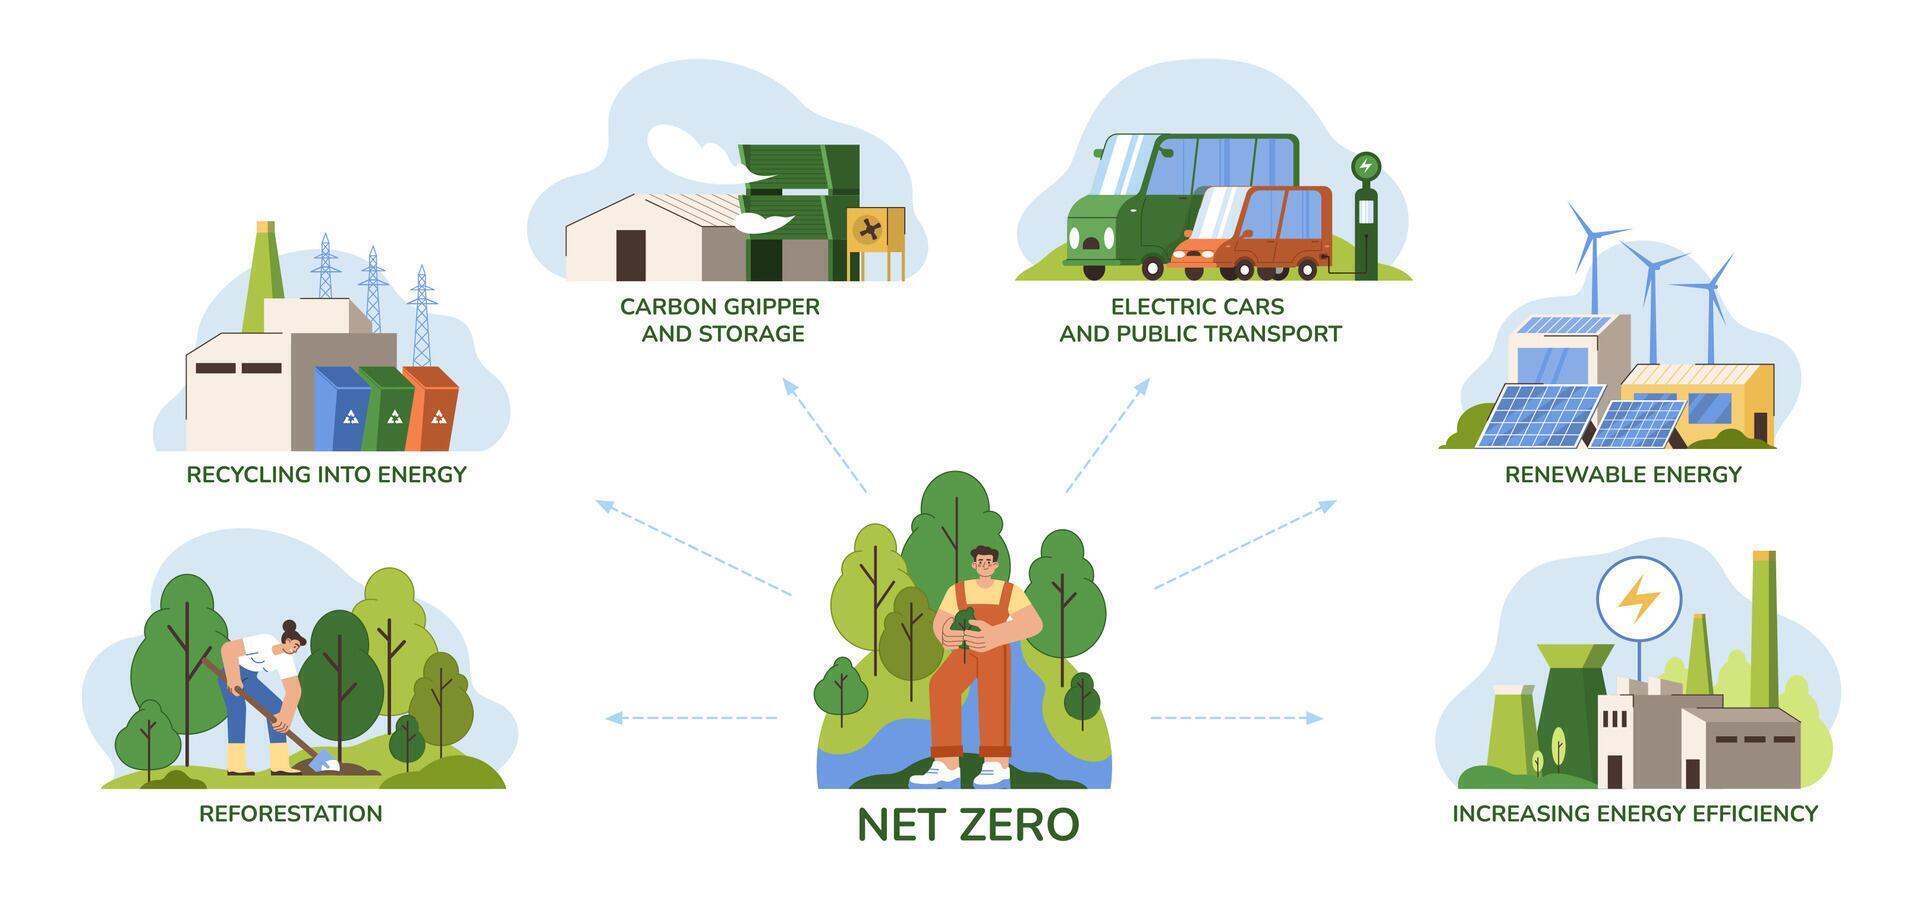 Net zero emissions, carbon neutral concept. Strategy for reduce greenhouse gas emissions. Steps to protect atmosphere from pollution such as renewable energy, recycling and reforestation. Save planet vector